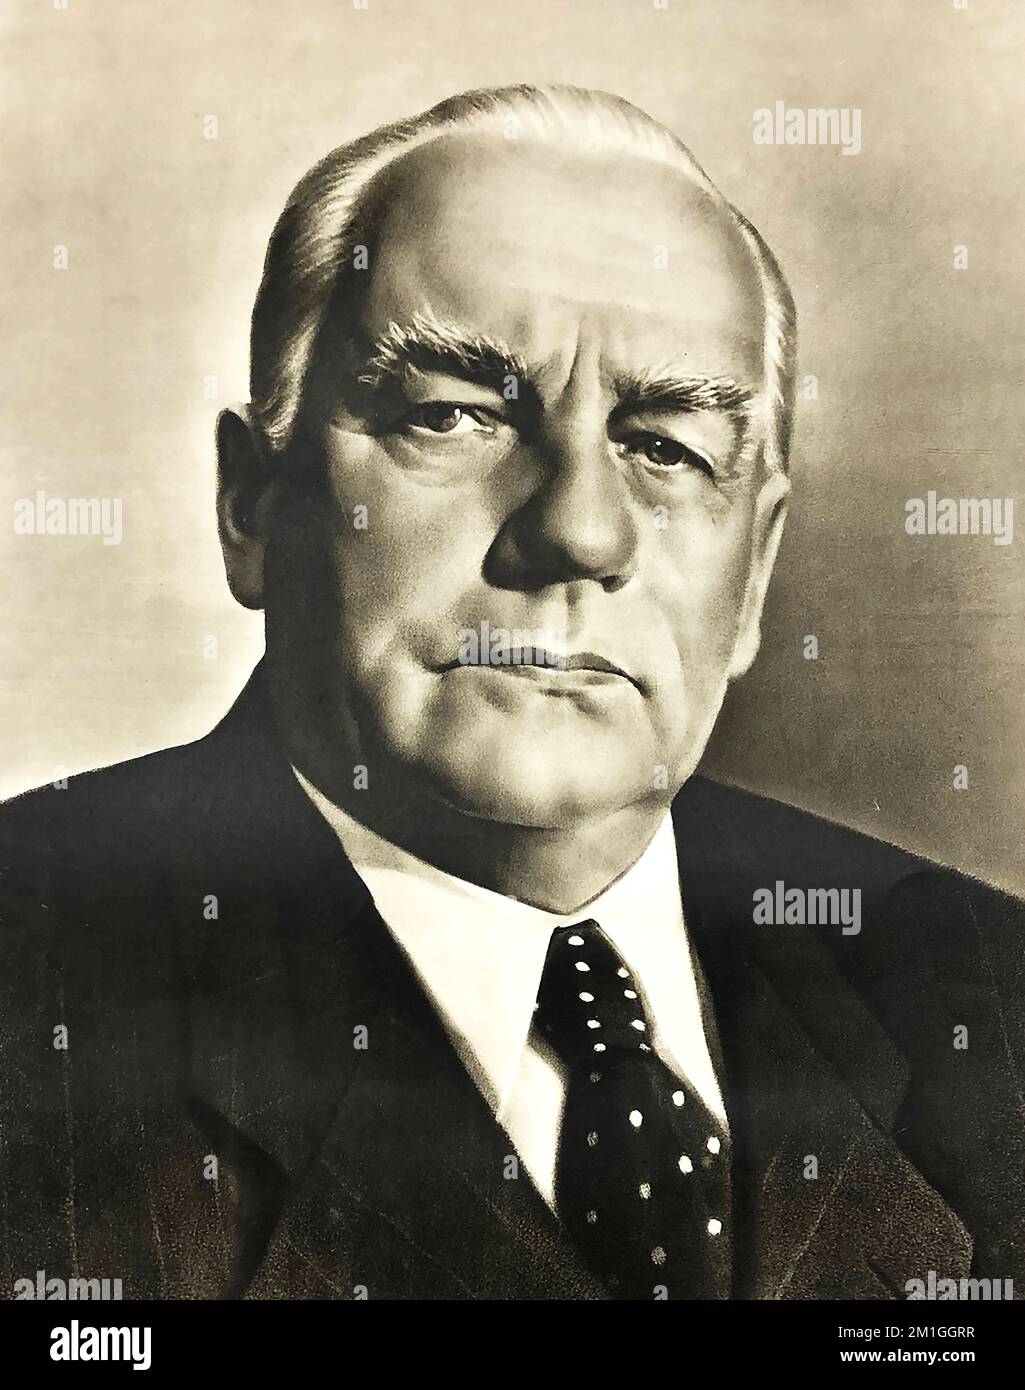 Friedrich Wilhelm Reinhold Pieck (1876 – 1960) was a German communist politician who served as the chairman of the Socialist Unity Party from 1946 to 1950 and as president of the German Democratic Republic from 1949 to 1960. Stock Photo